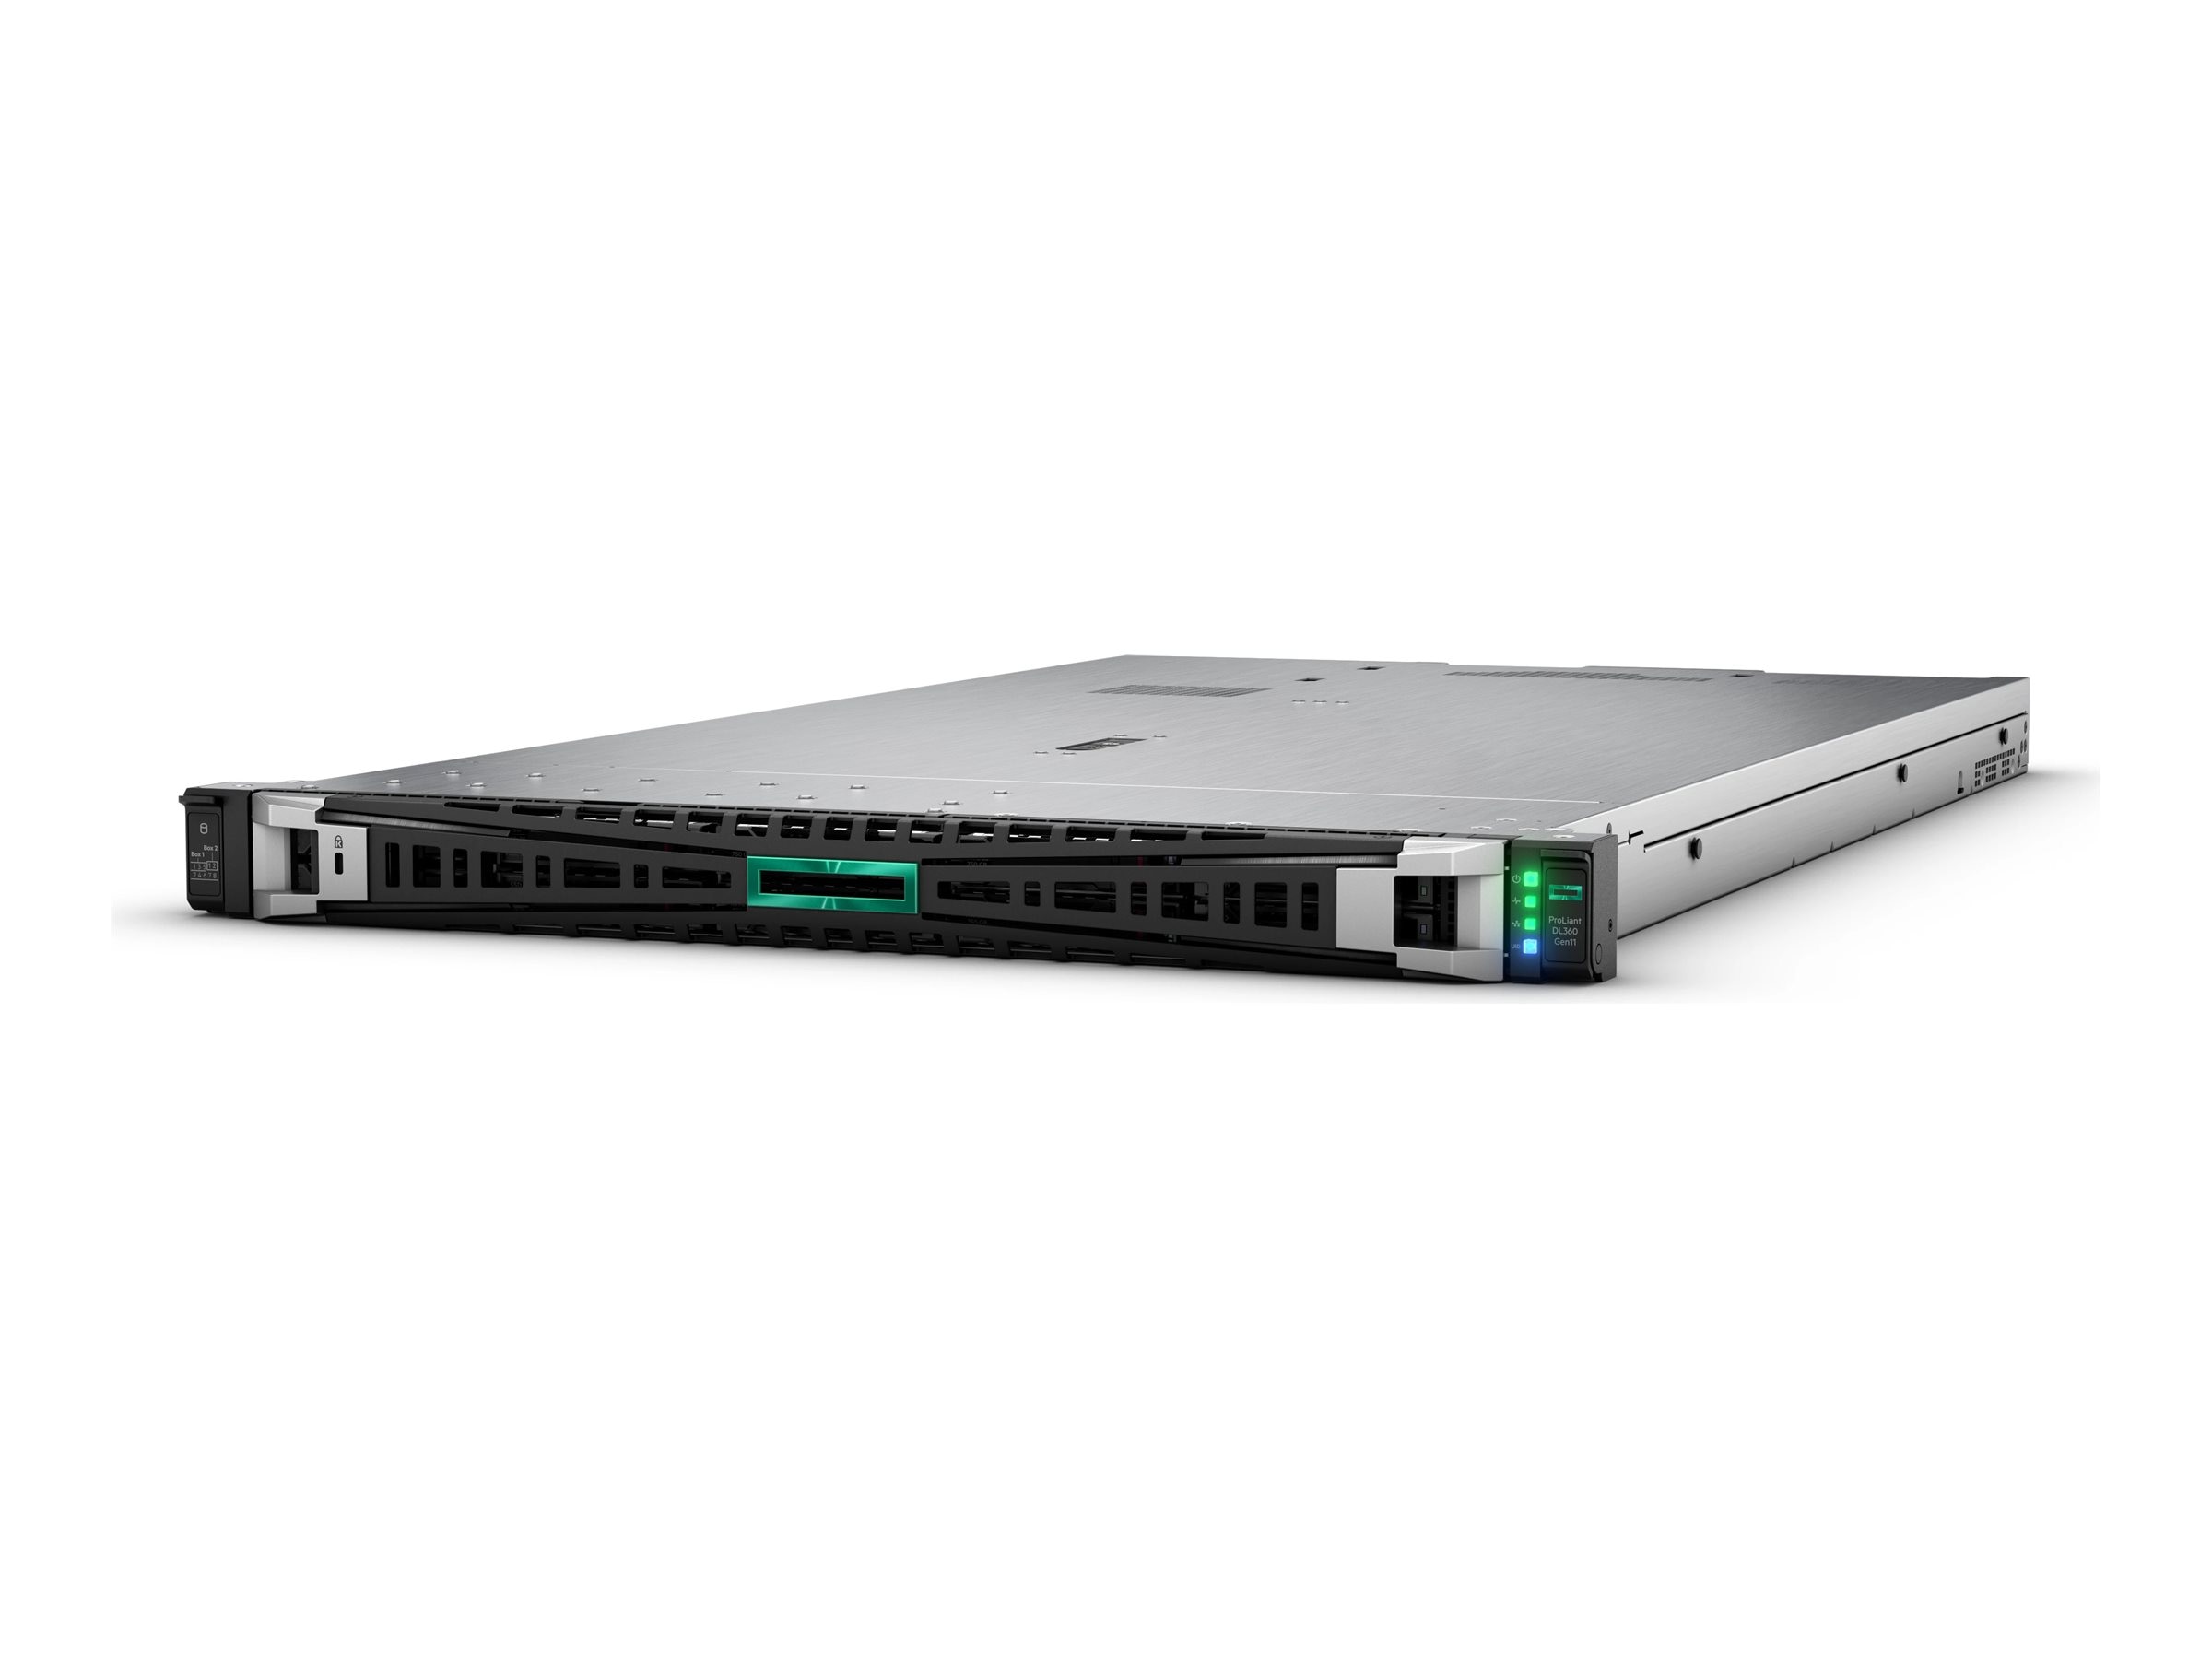 HPE 366T 4-Port 1Gb Ethernet Adapter (811546-B21)